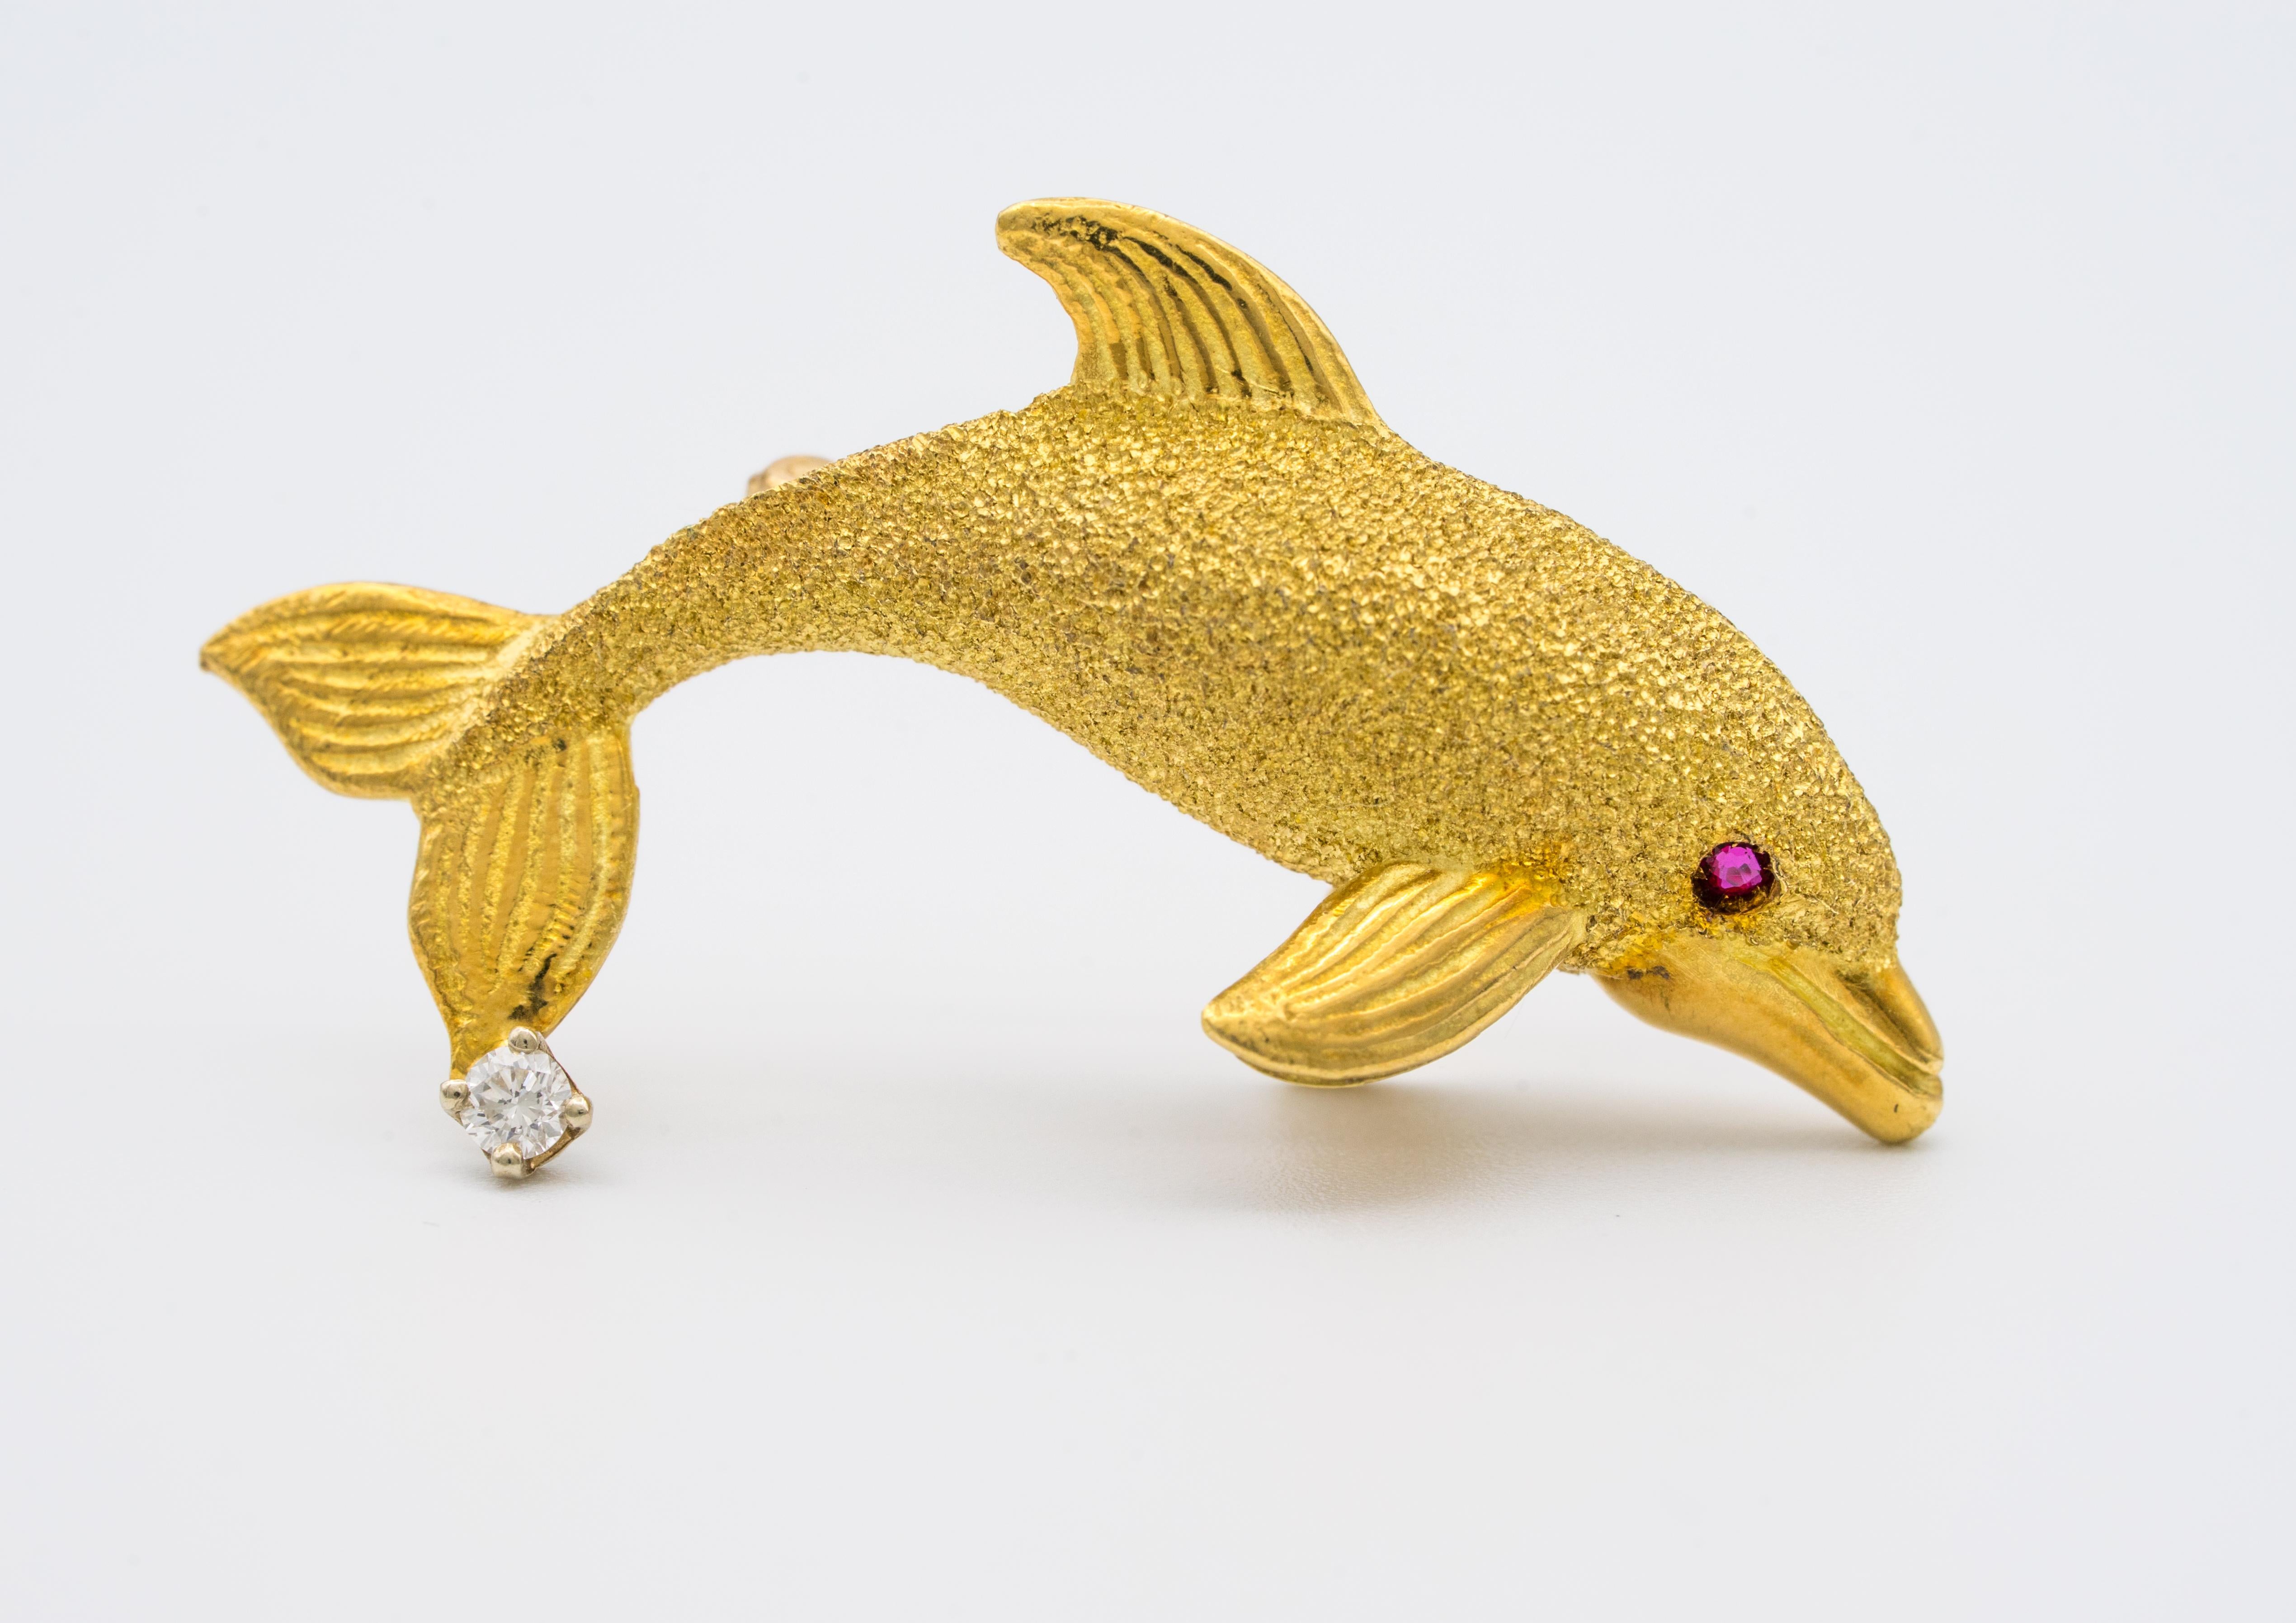 Vintage Dolphin pin finely crafted in highly textured 18 Karat yellow gold with one deep red ruby eye and one diamond set in 4 prongs in the tail.  This brooch has a sandblasted finish and texture. Round brilliant diamond measures 2.5 mm